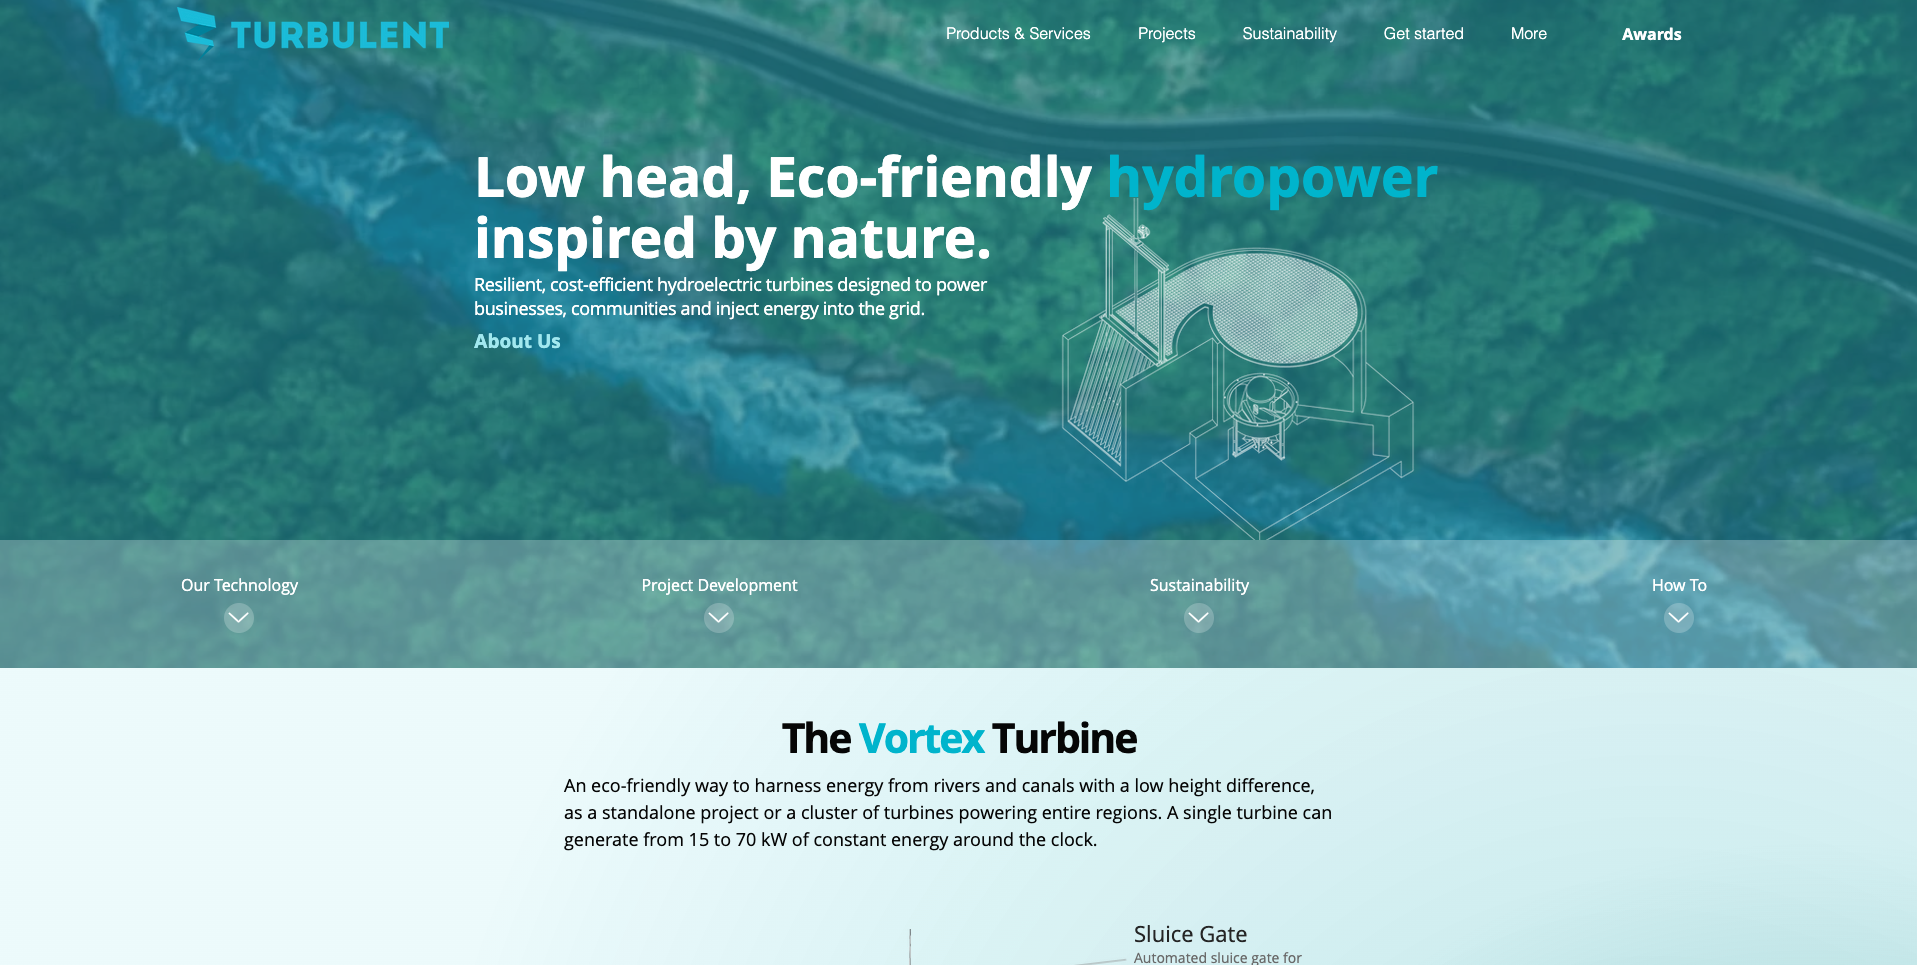 Turbulent is a low head vortex turbine that generates renewable energy continuously from using the power of water.